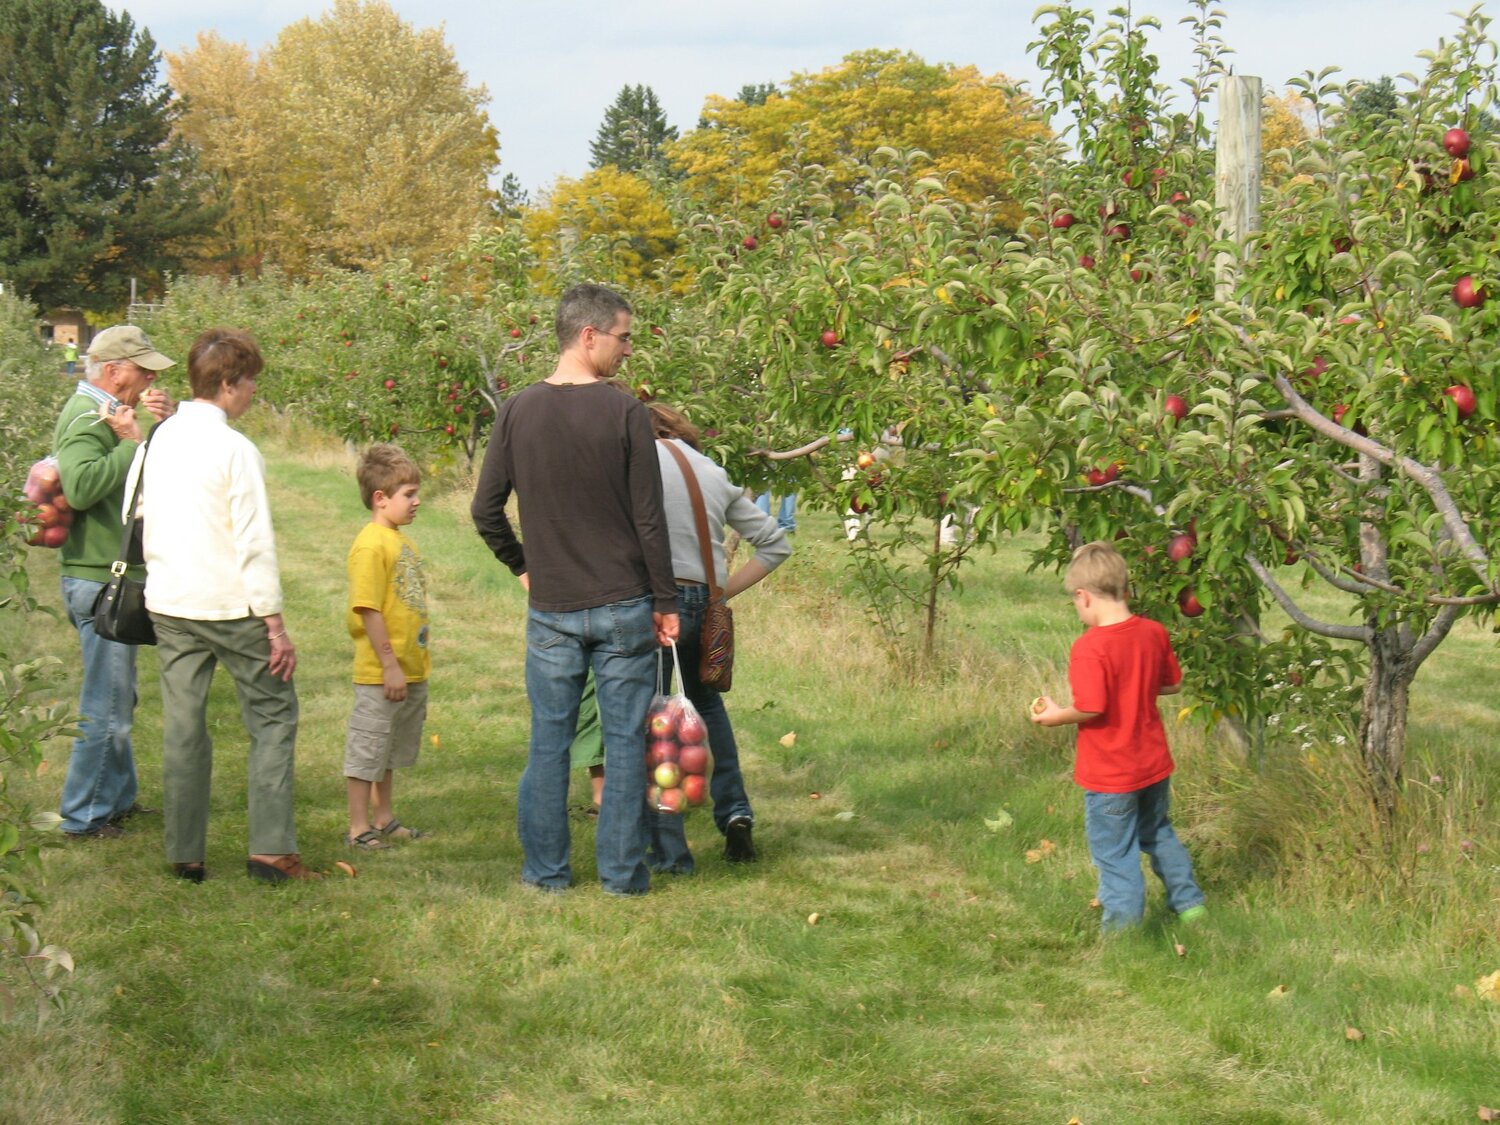 Visitors pick apples on the grounds of Carpenter Nature Center in Hastings.